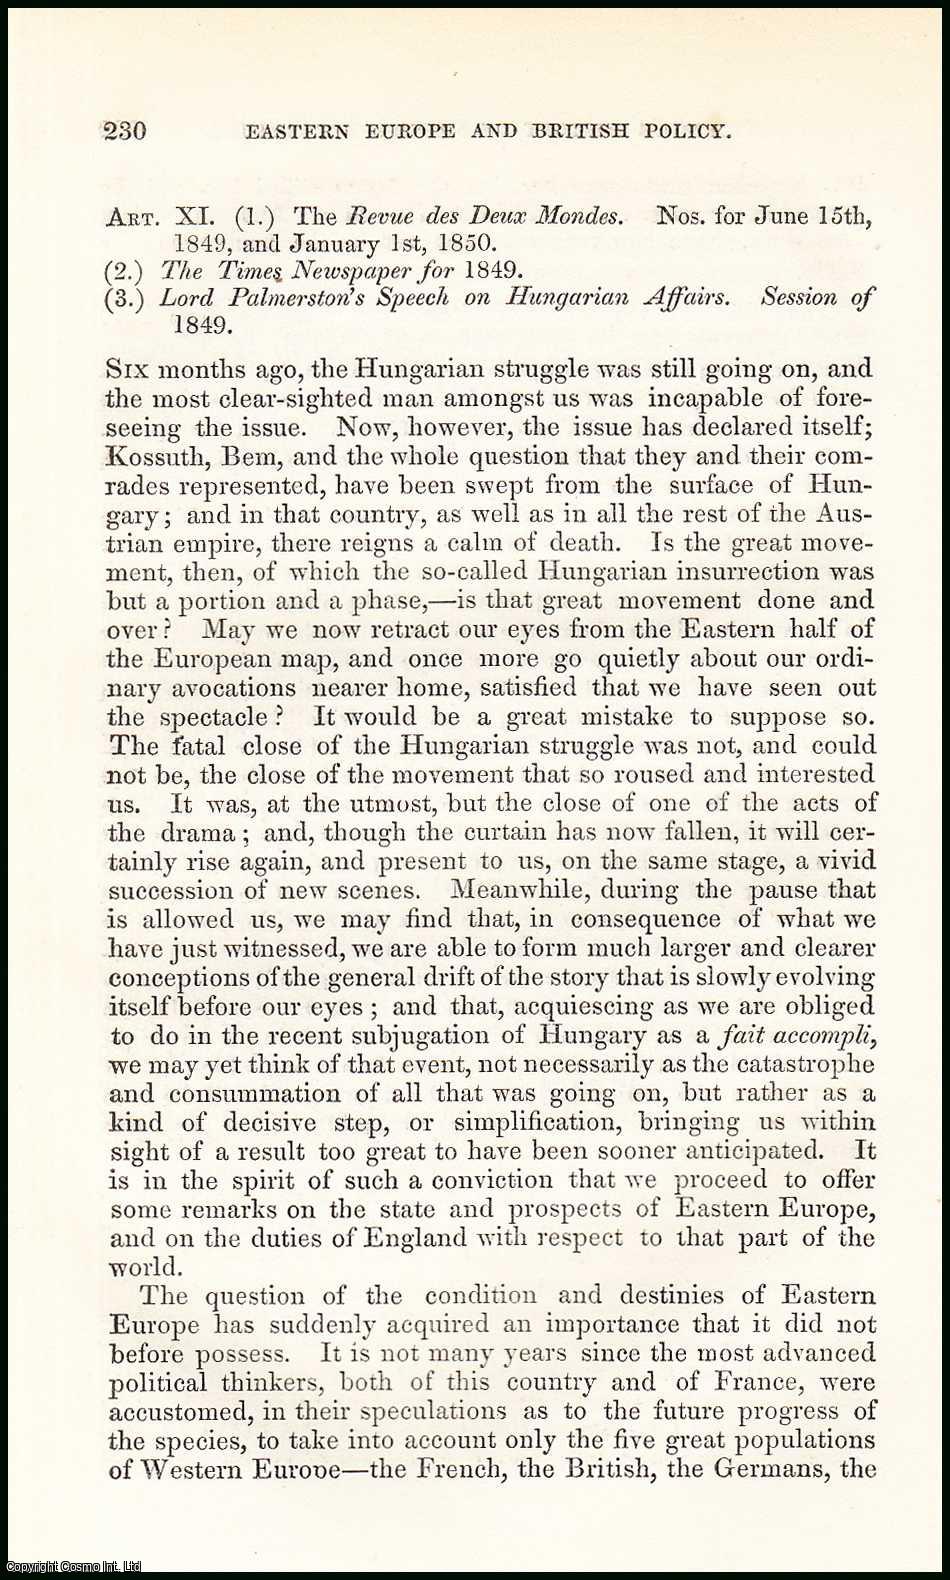 Author Unknown - Eastern Europe and British policy. A rare original article from the British Quarterly Review, 1850.